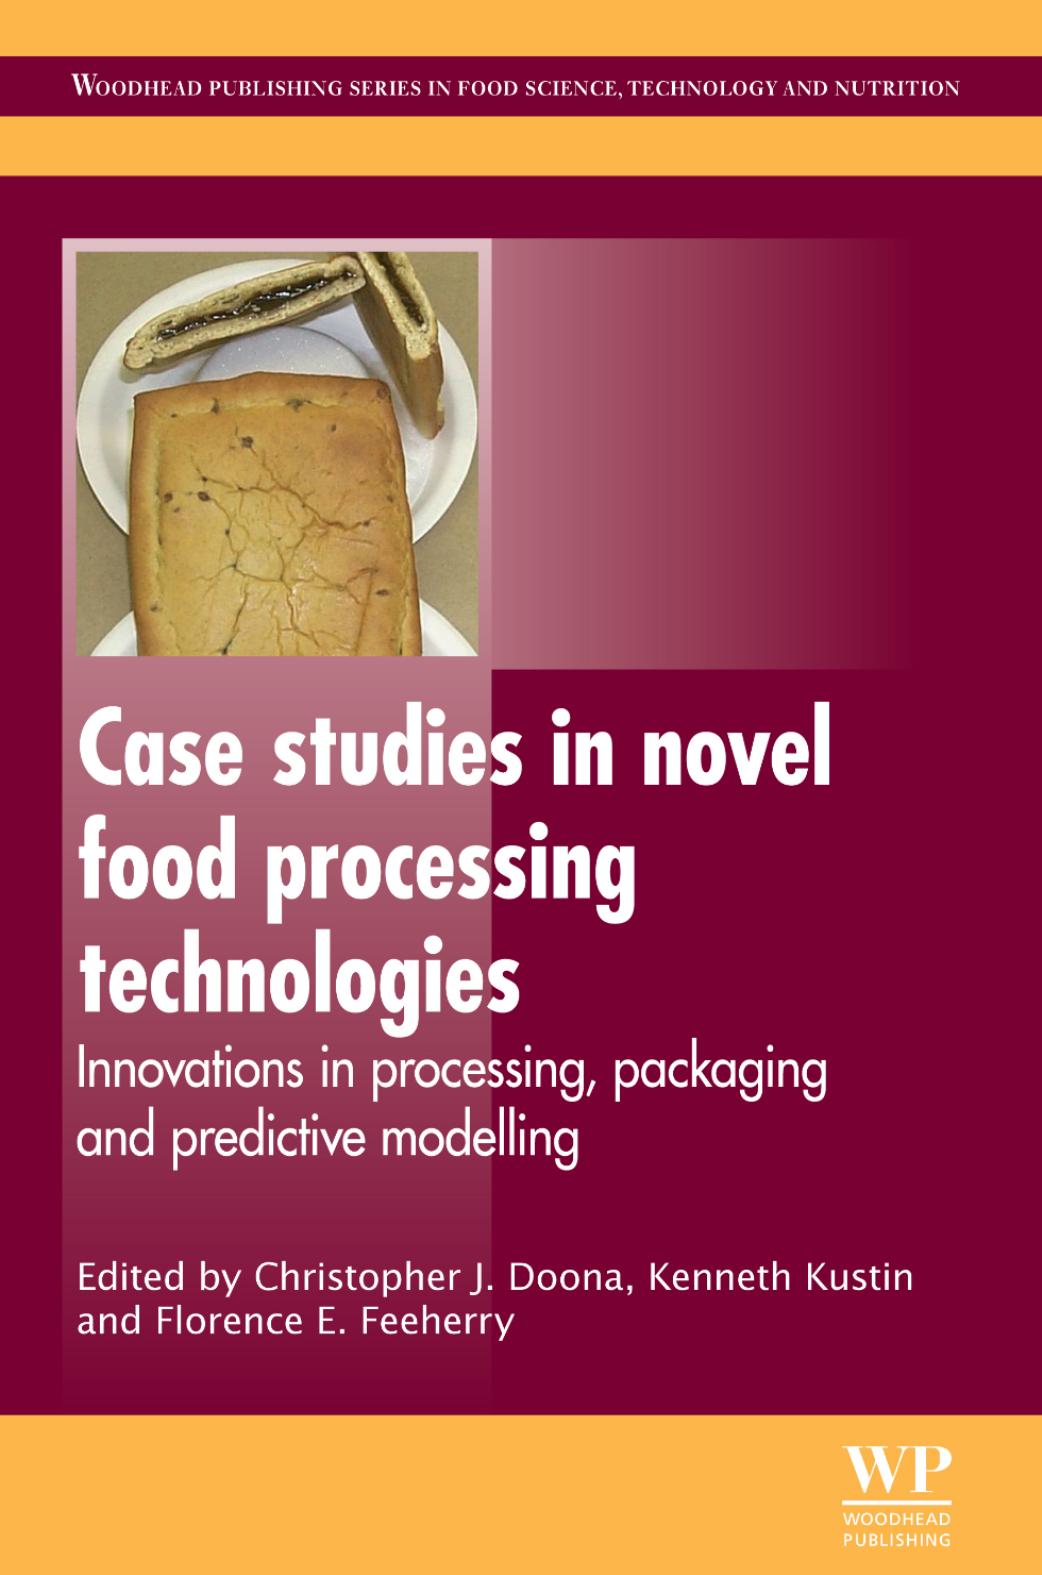 197. Case Studies in Novel Food Processing Technologies (2010) by Unknown